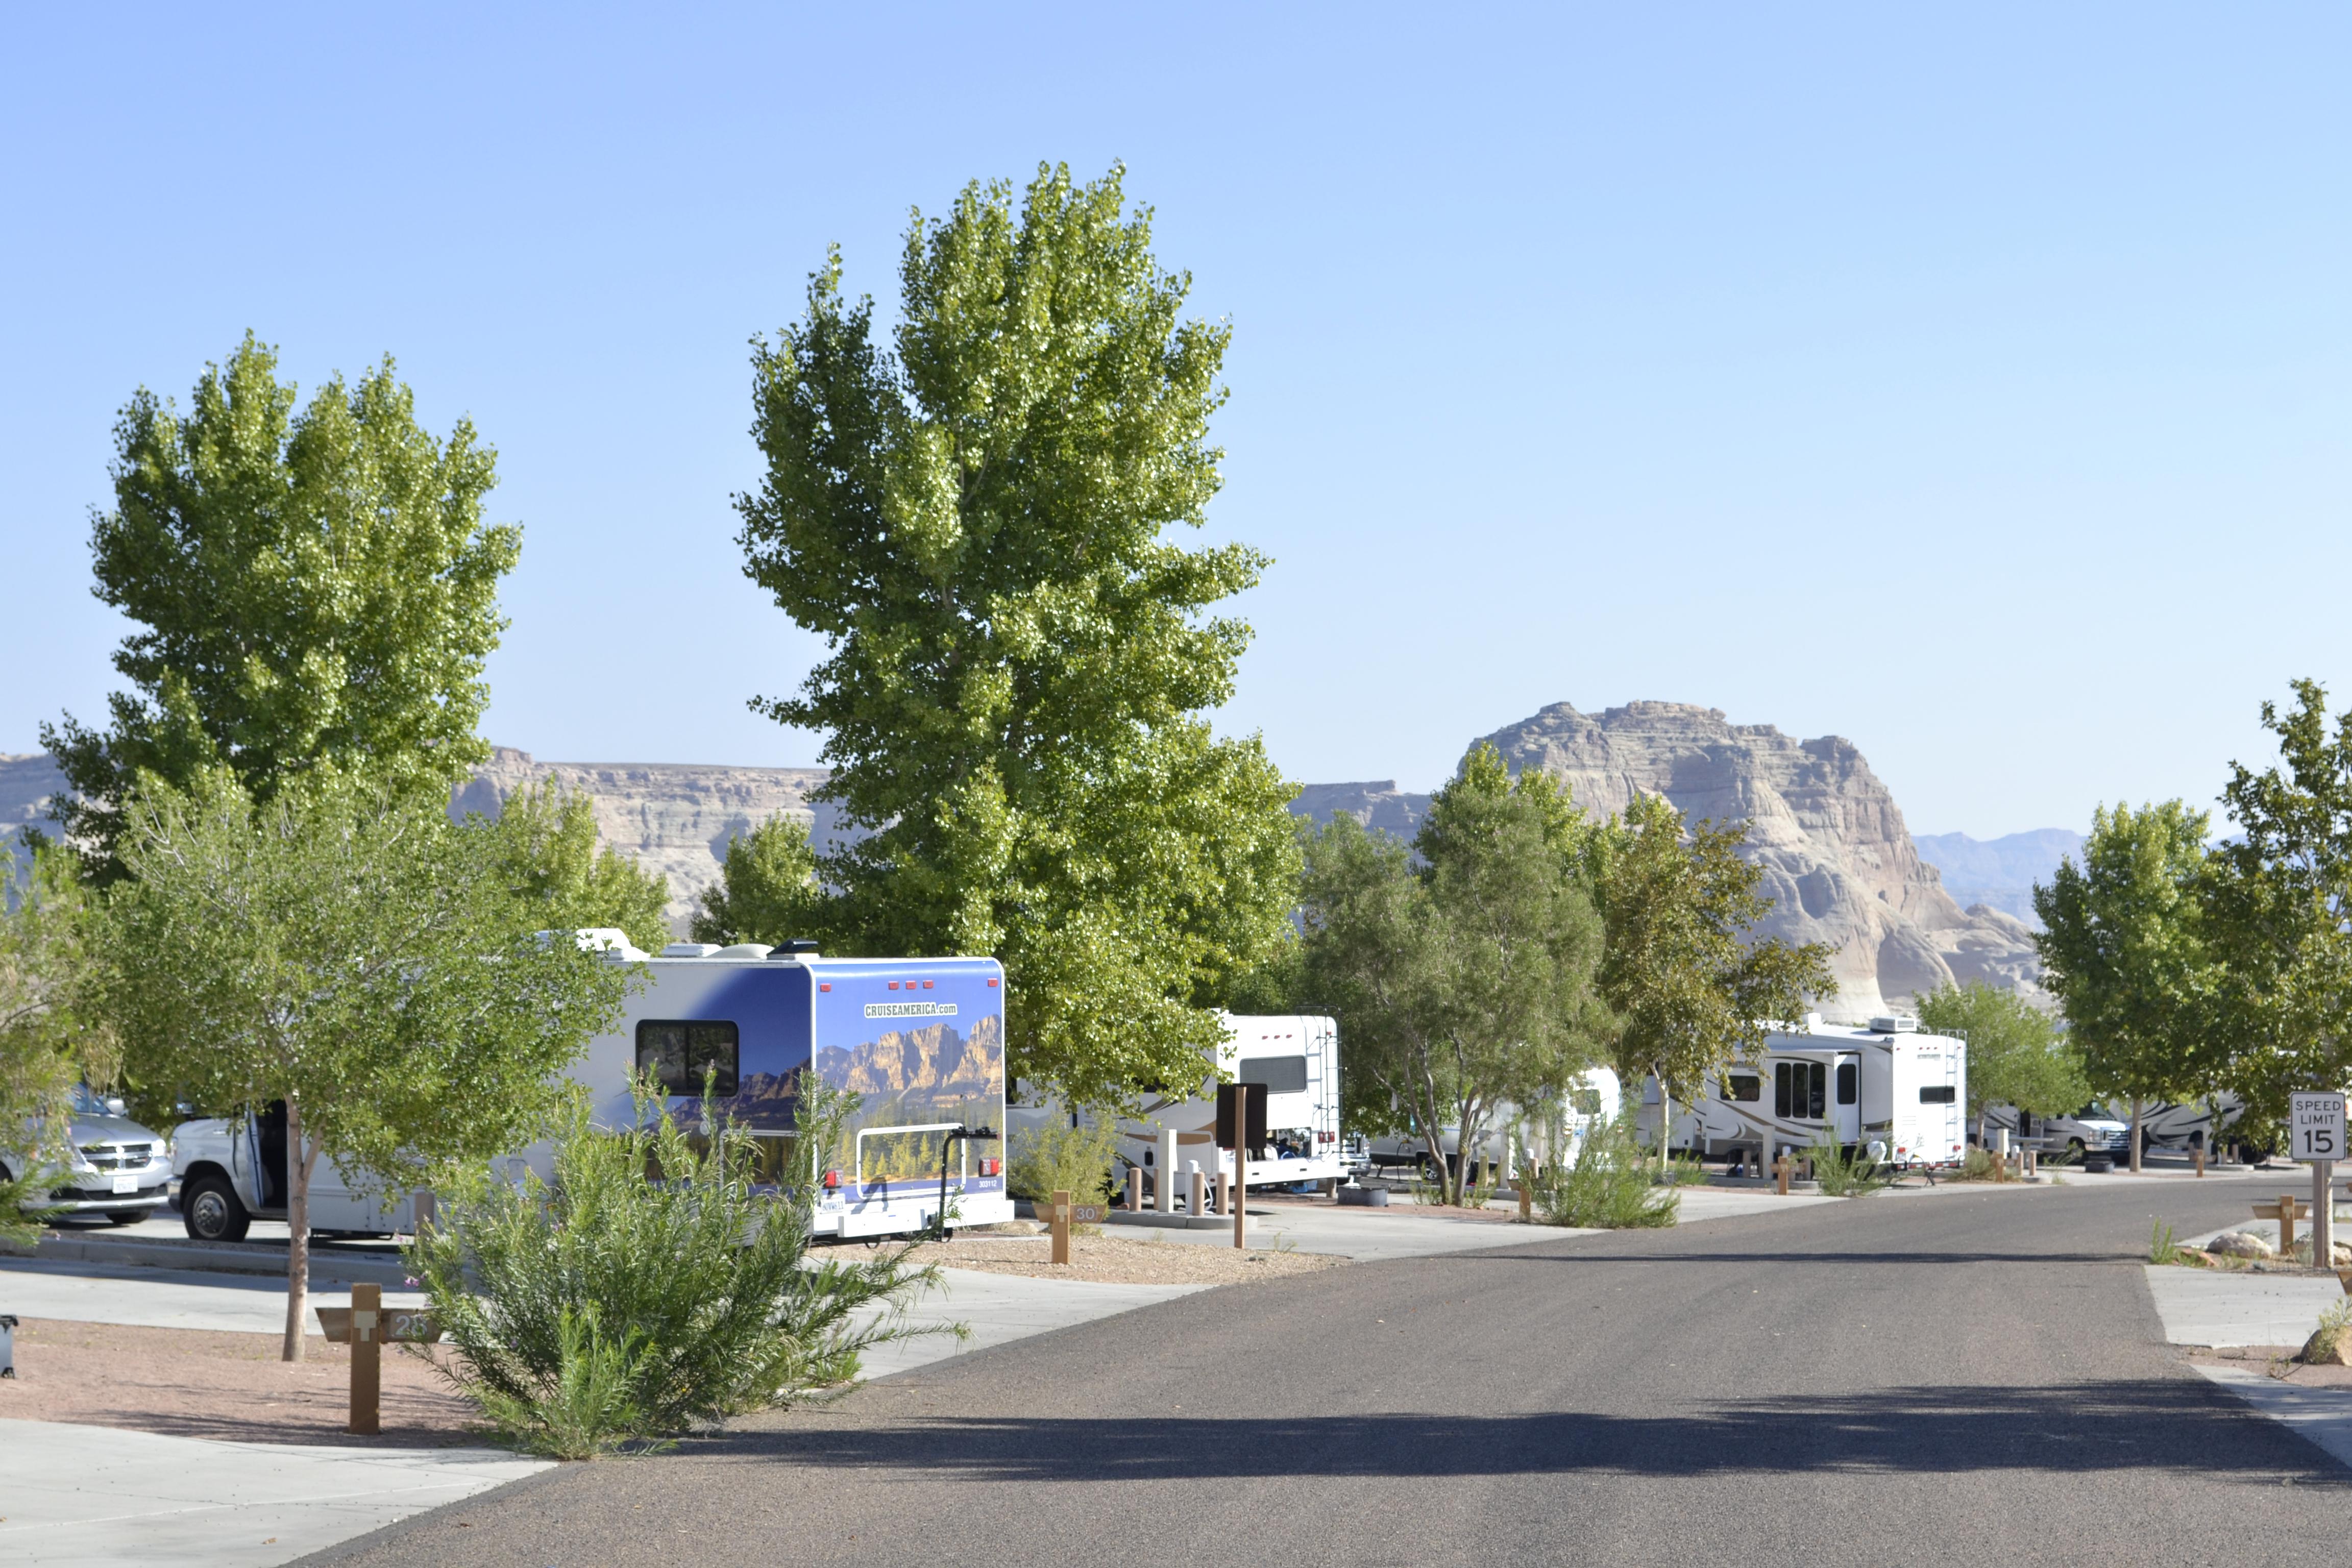 Row of multicolored recreational vehicles separated by trees and pavement.